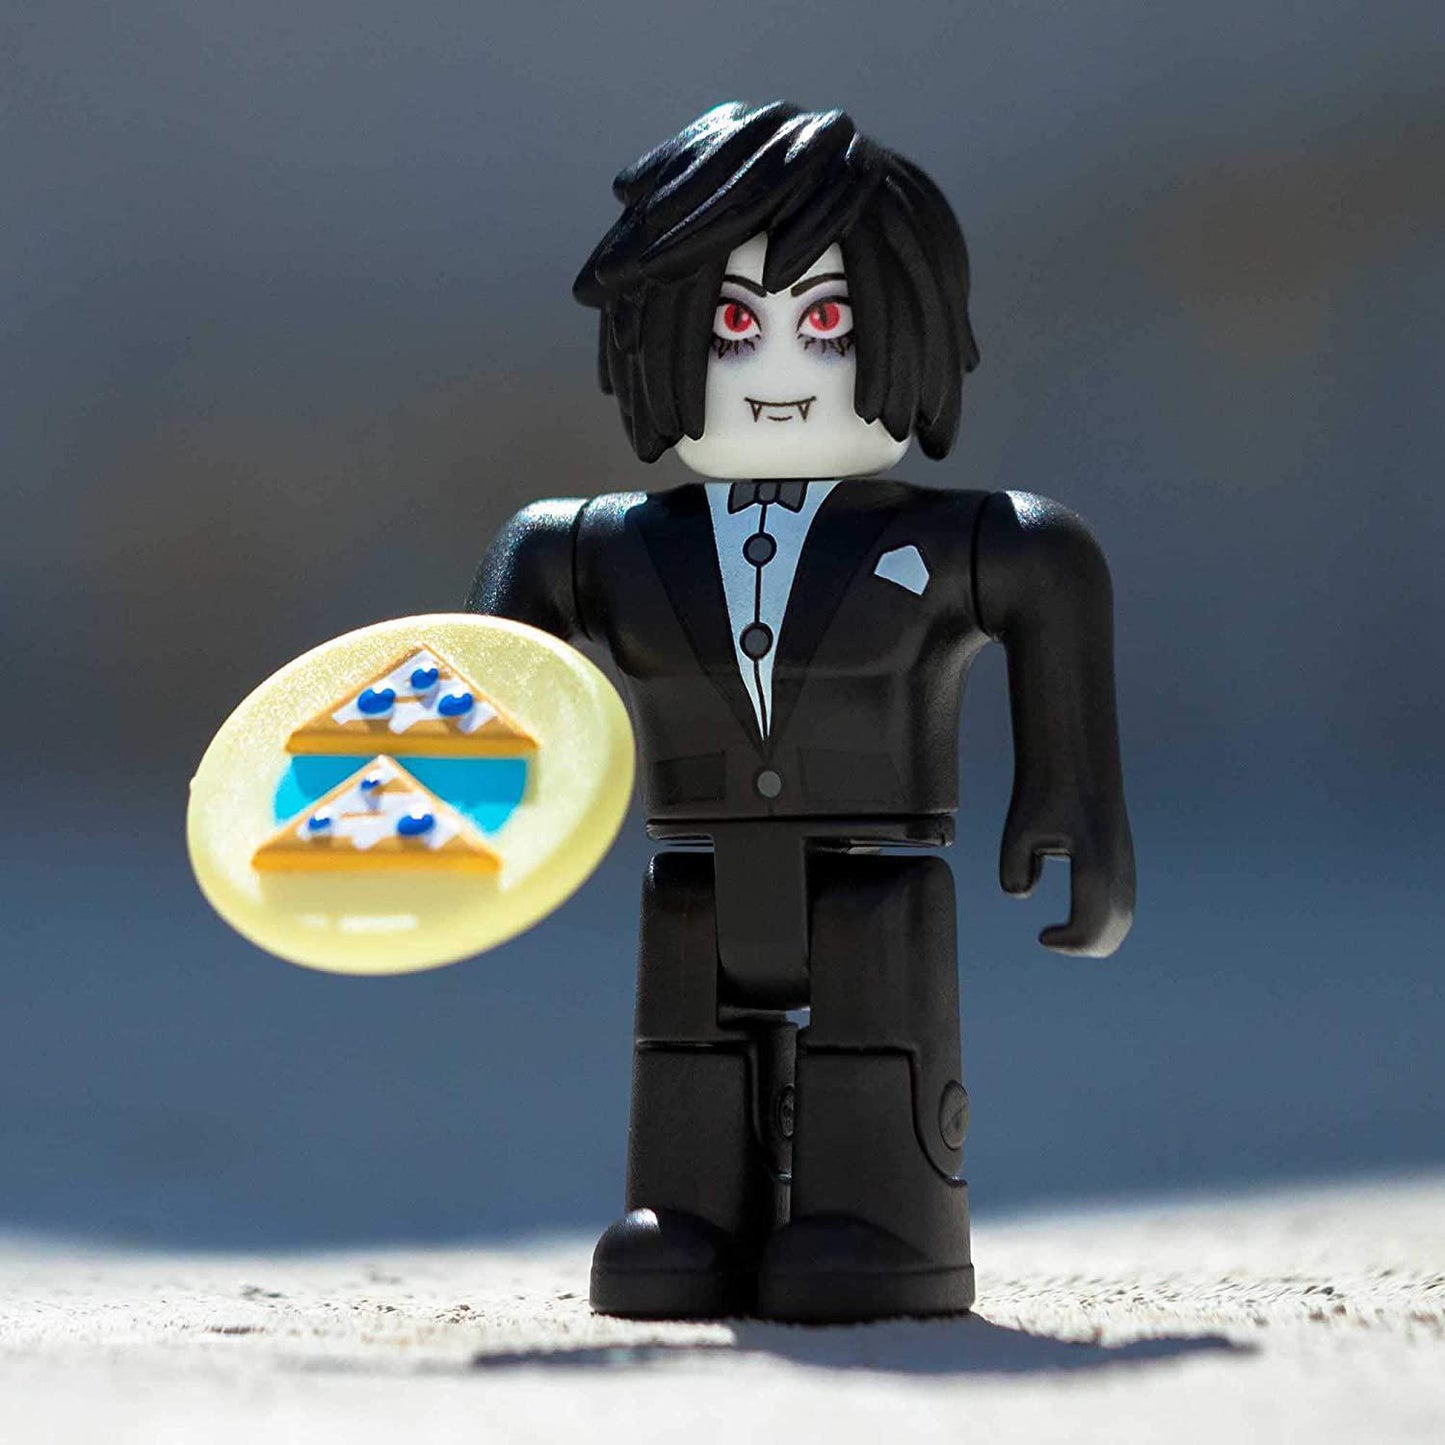 Roblox Celebrity Collection - Series 5 Mystery Figure 6-Pack [Includes 6 Exclusive Virtual Items]